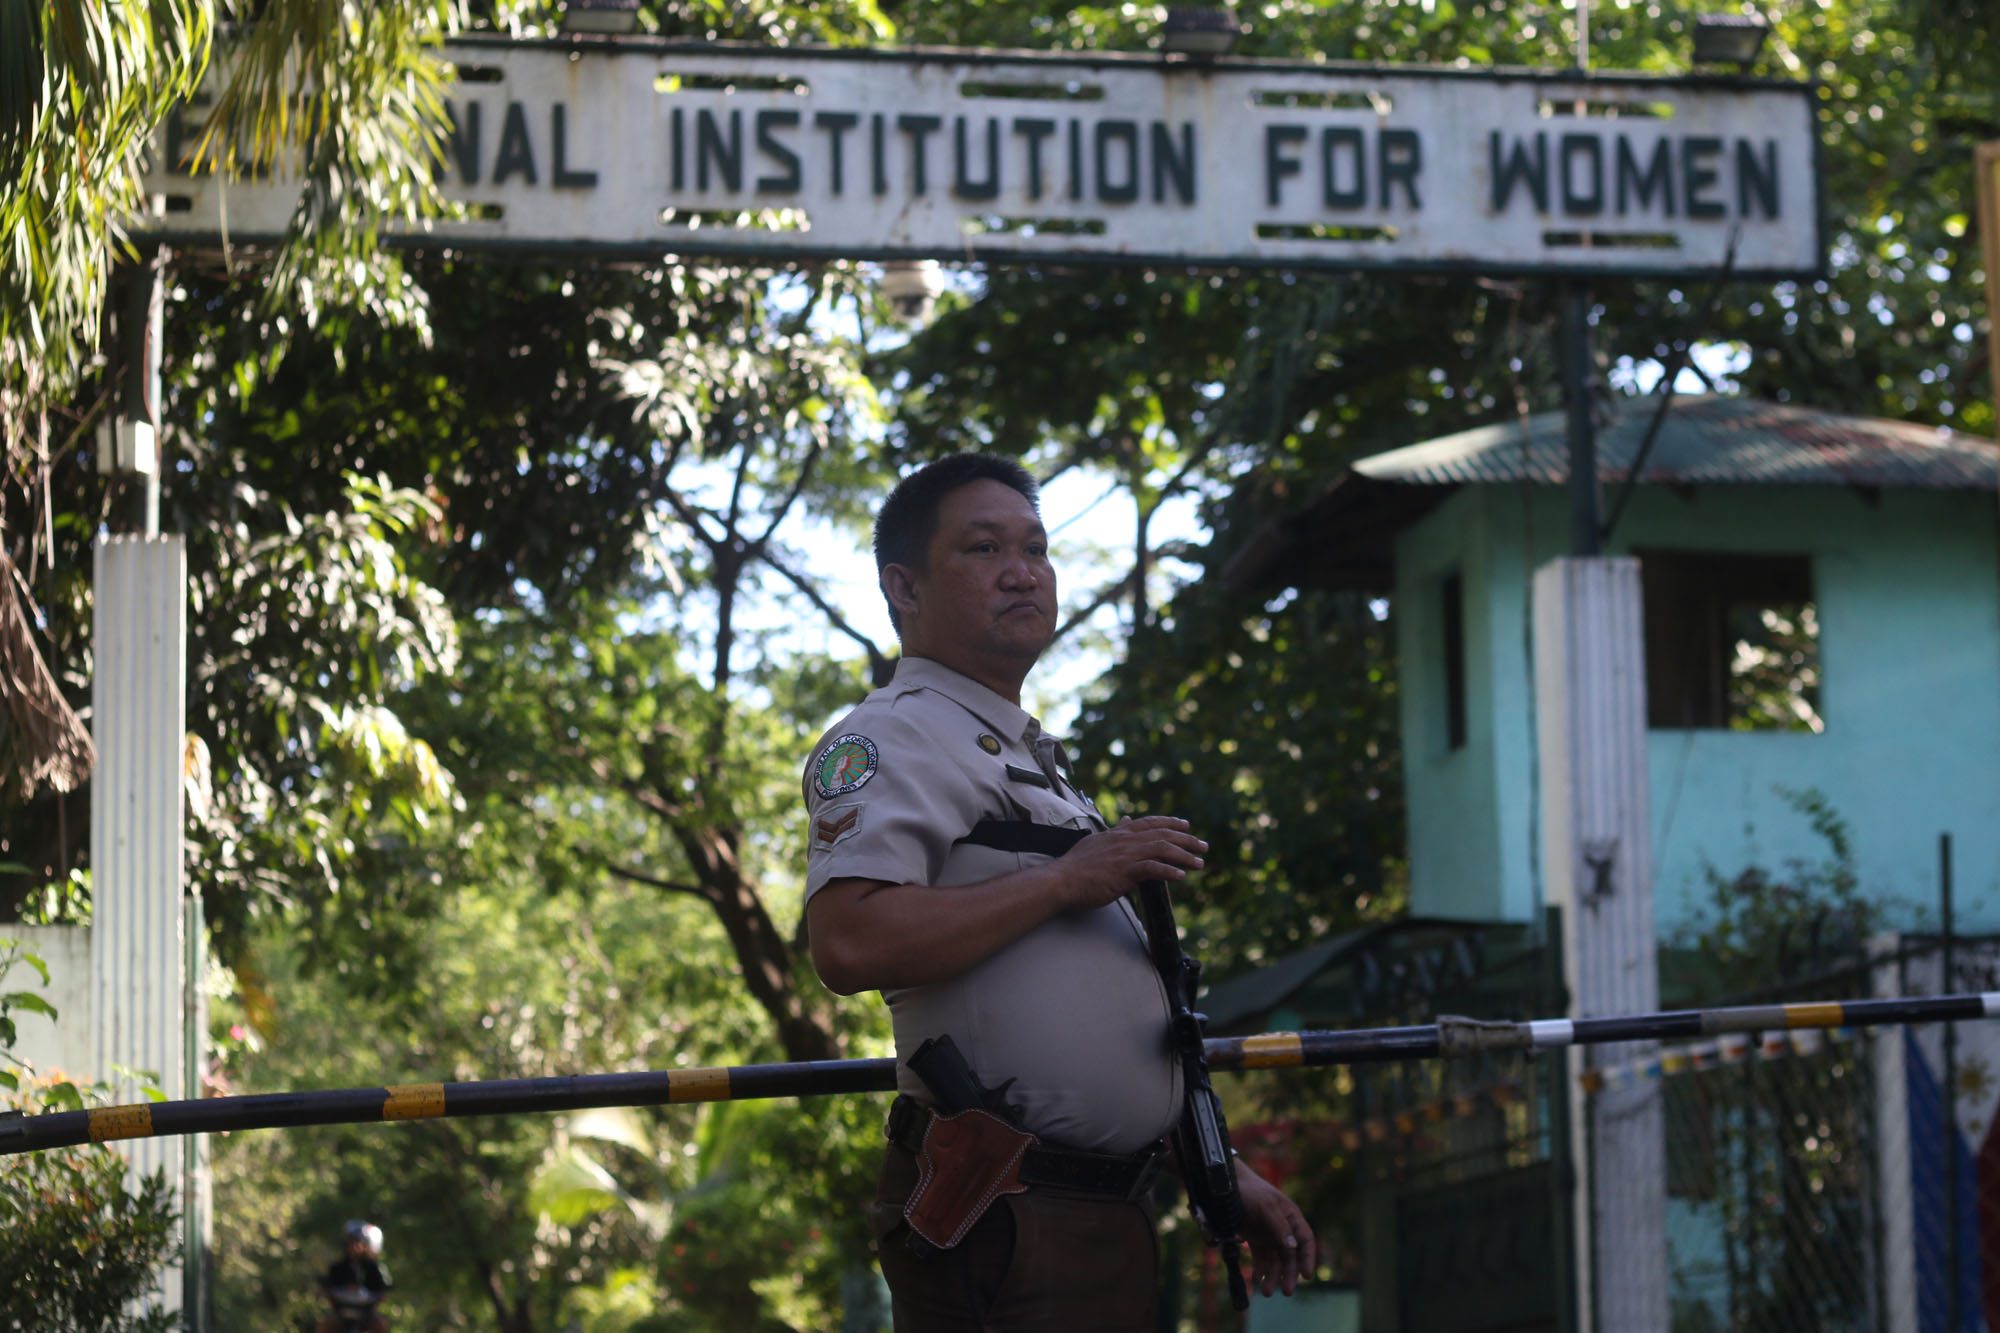 DETENTION FACILITY. The Correctional Institution for Women in Mandaluyong City where pork barrel scam mastermind Janet Lim Napoles was previously jailed. File photo by Inoue Jaena/Rappler 